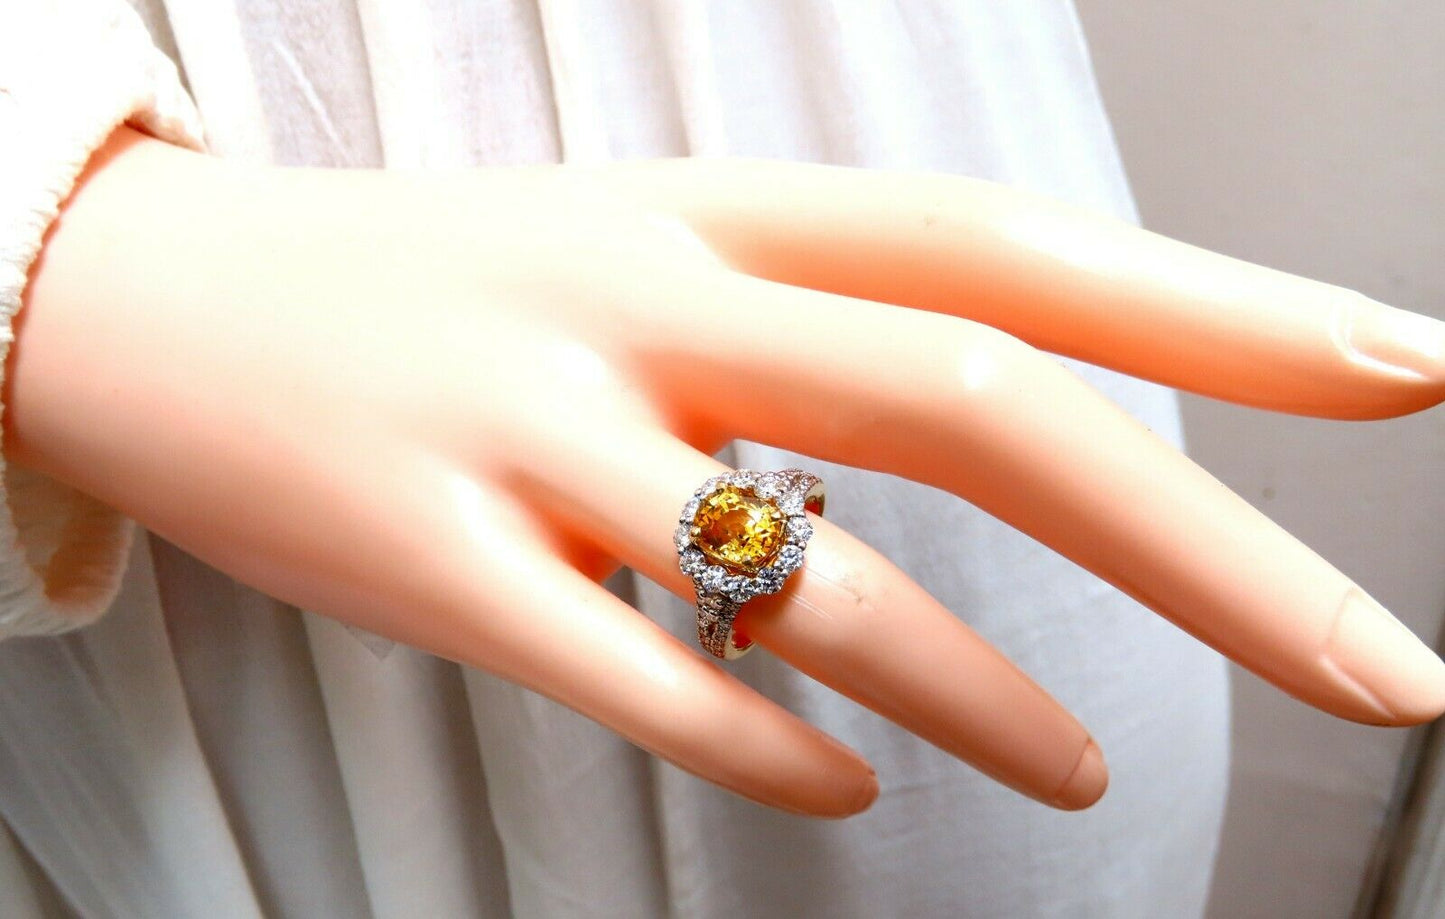 GIA Certified 2.59Ct Natural Yellow Natural Sapphire Diamonds Ring 14kt